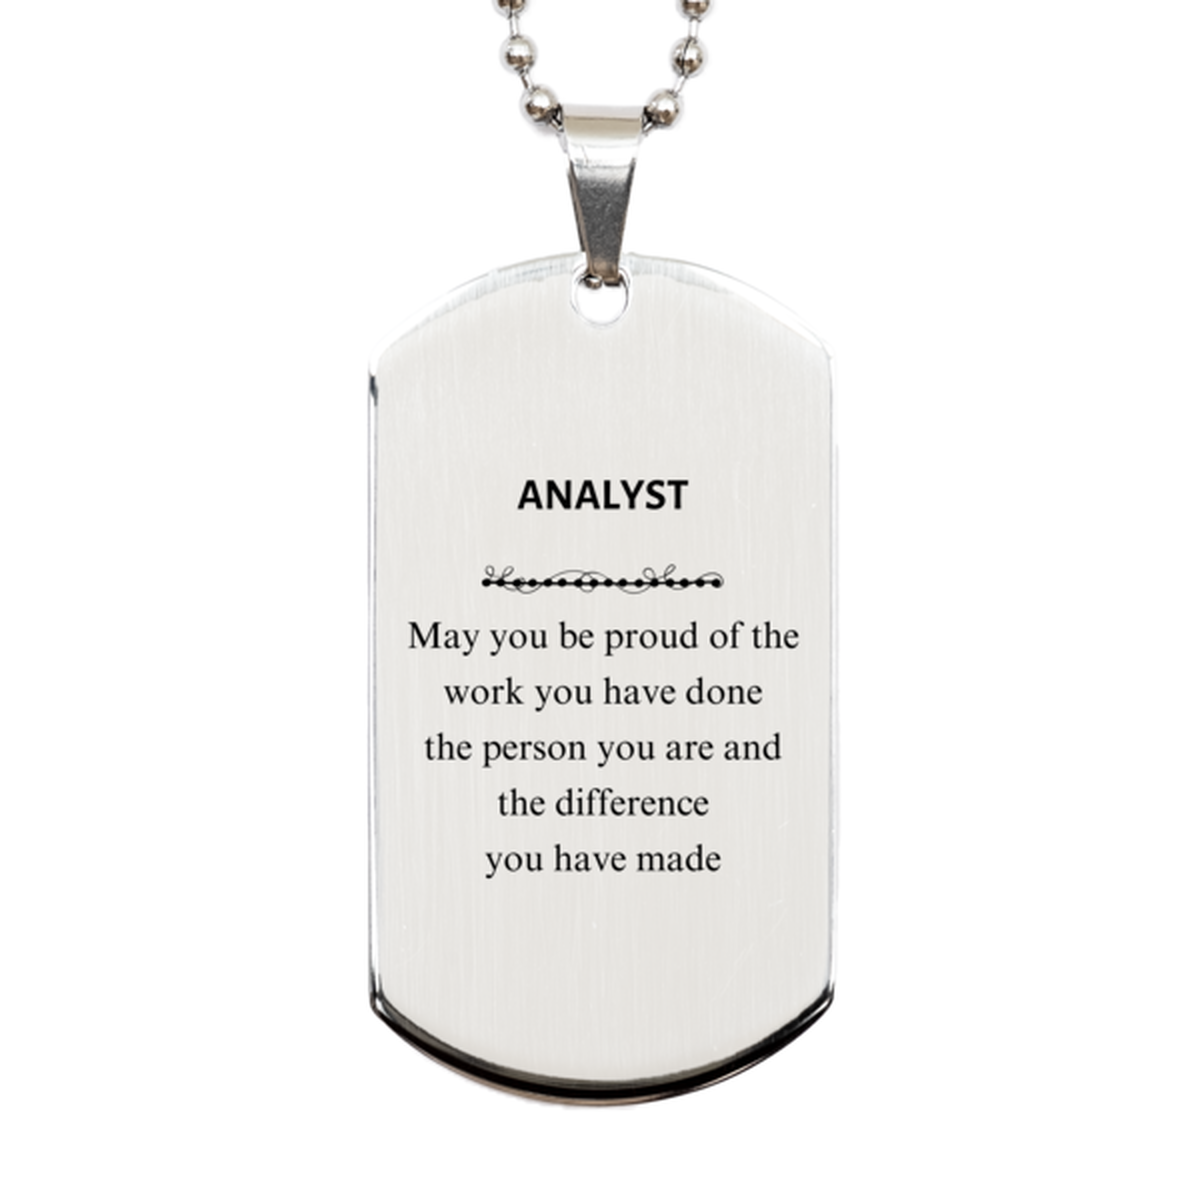 Analyst May you be proud of the work you have done, Retirement Analyst Silver Dog Tag for Colleague Appreciation Gifts Amazing for Analyst